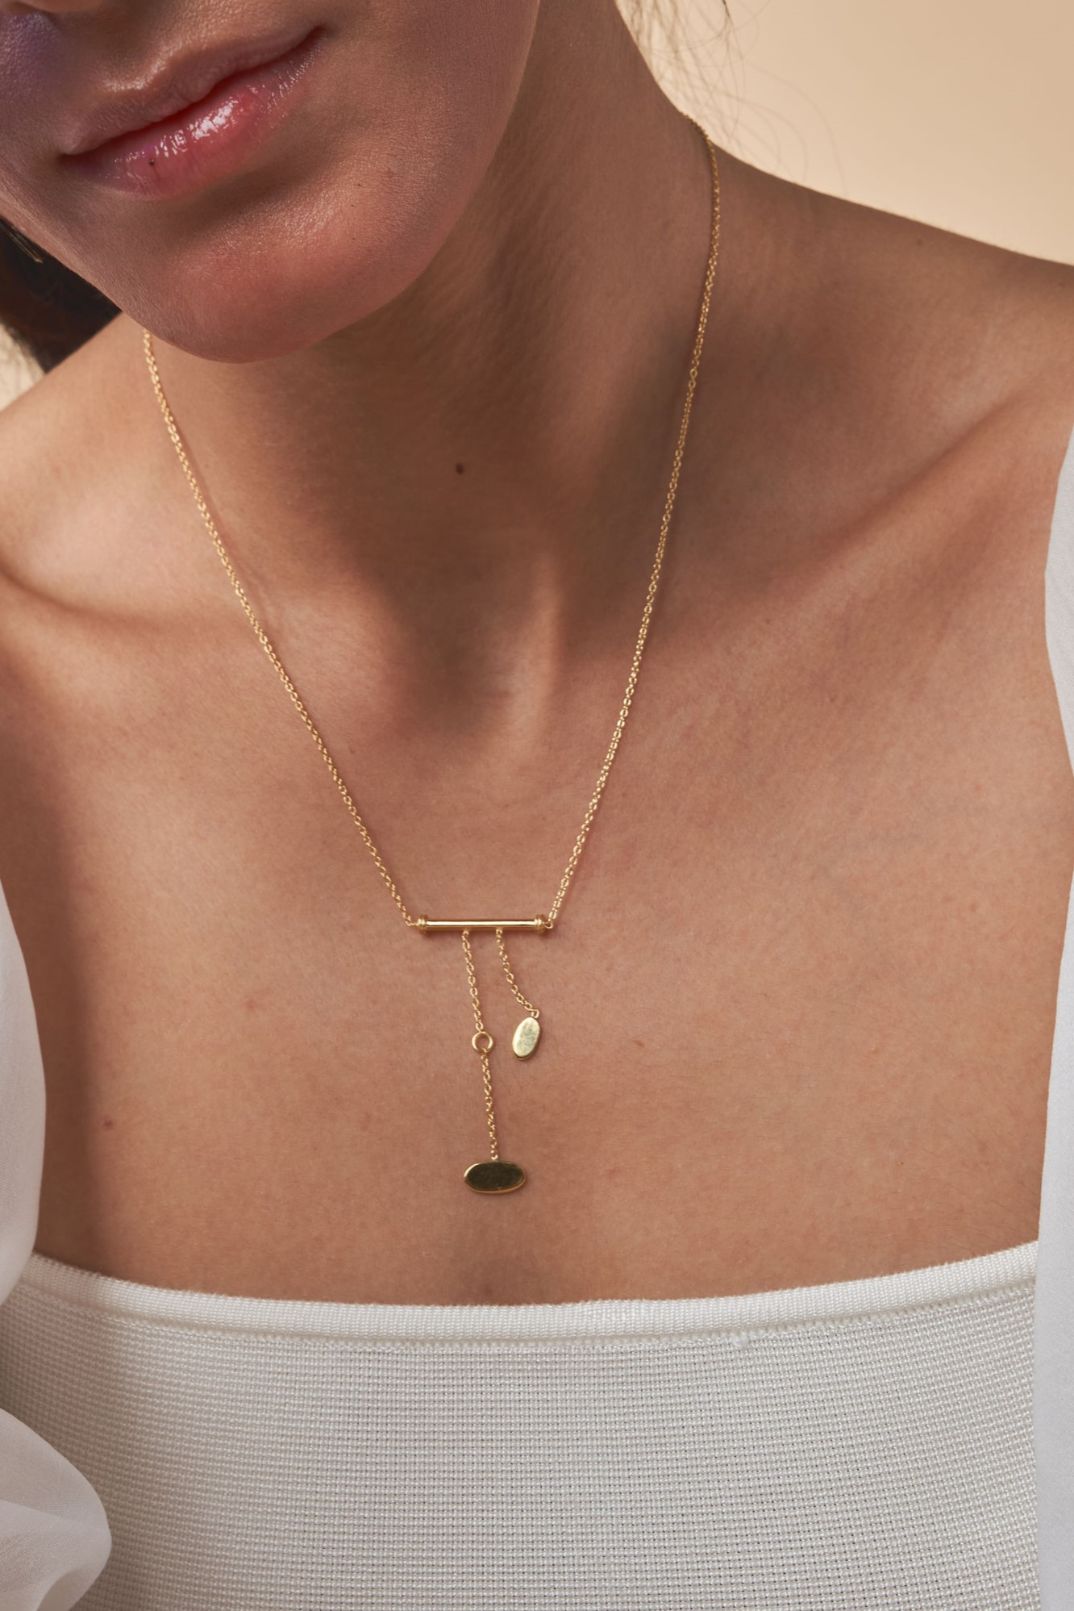 César Delicate Gold Chain Necklace with Two Hanging Tassels Mamour Paris Jewellery